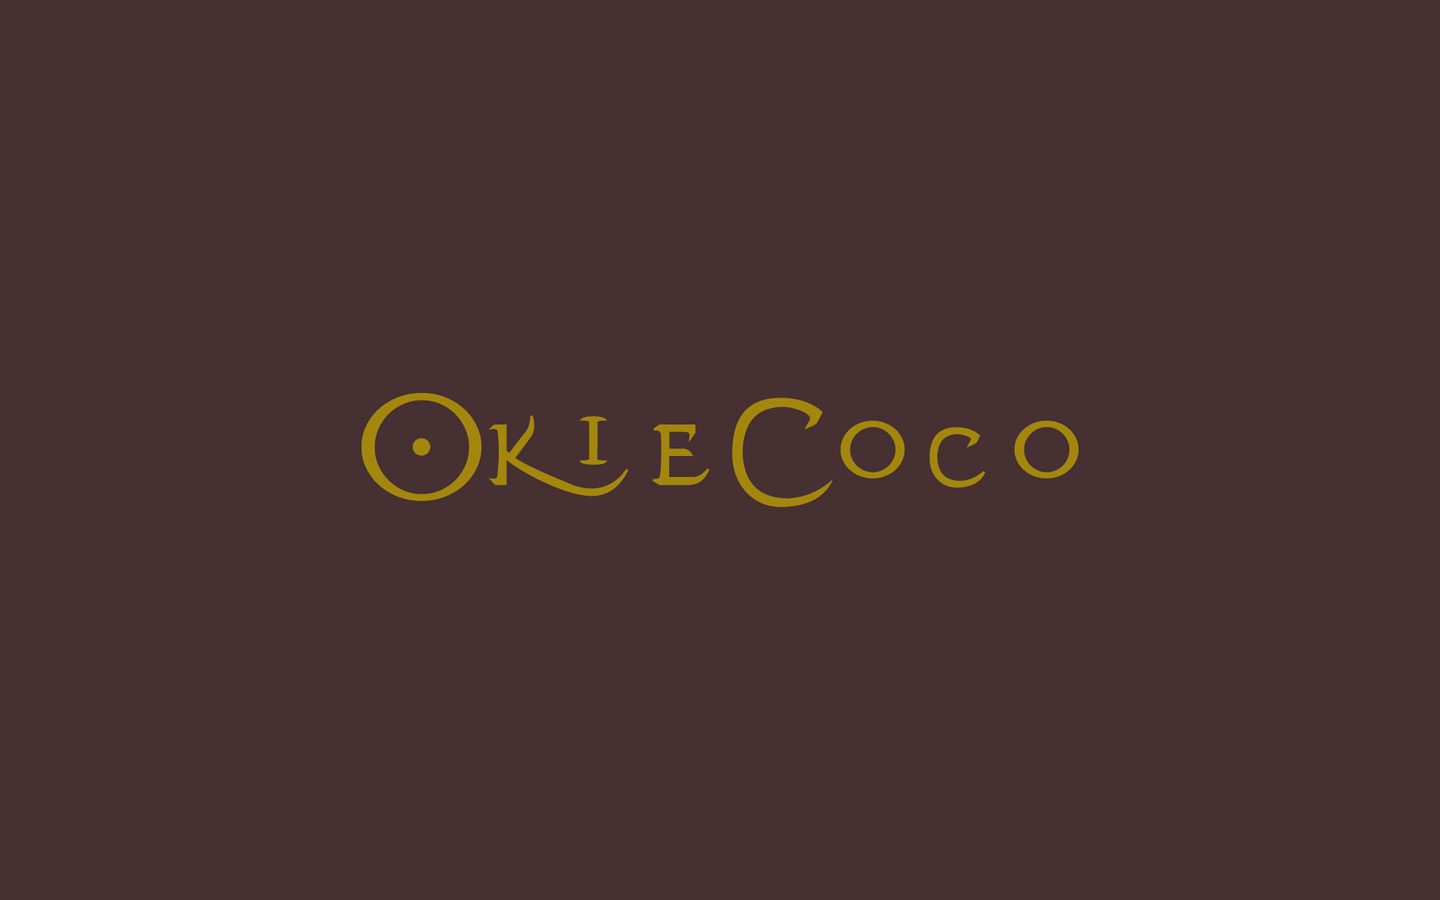 Okie Coco Chocolate Cafe, Logo Design in Brand Colours